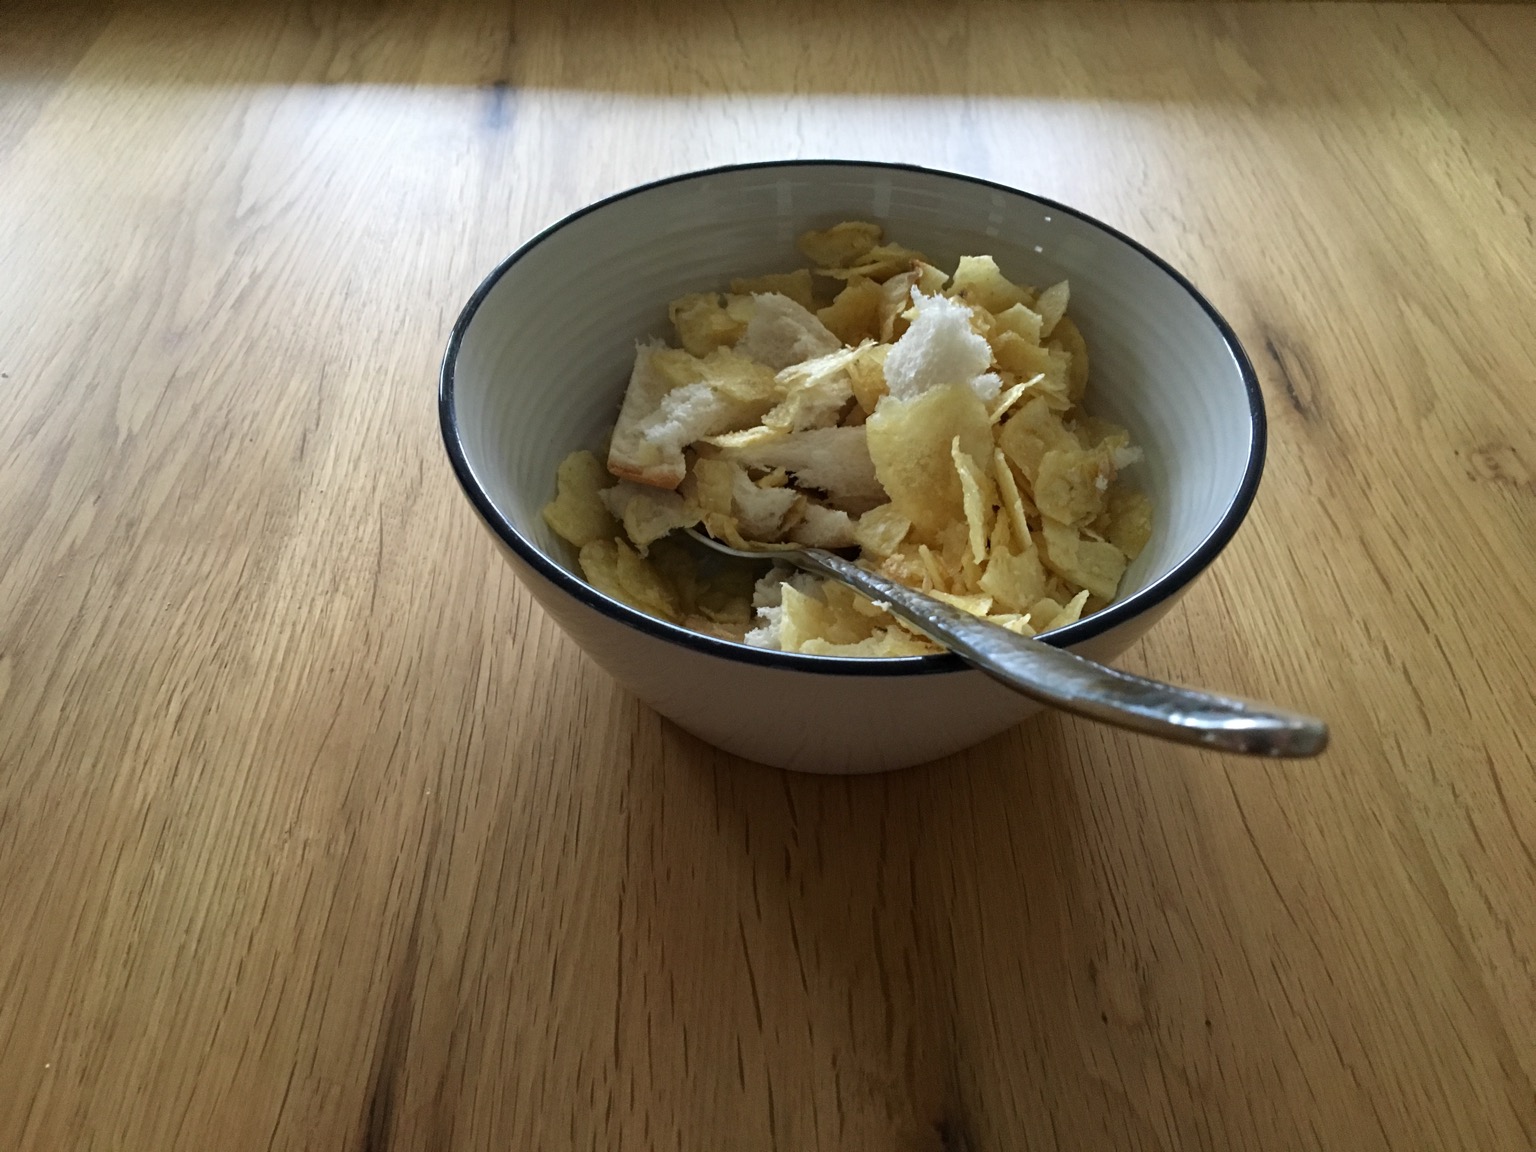 Torn white bread and crisps in a bowl with a spoon